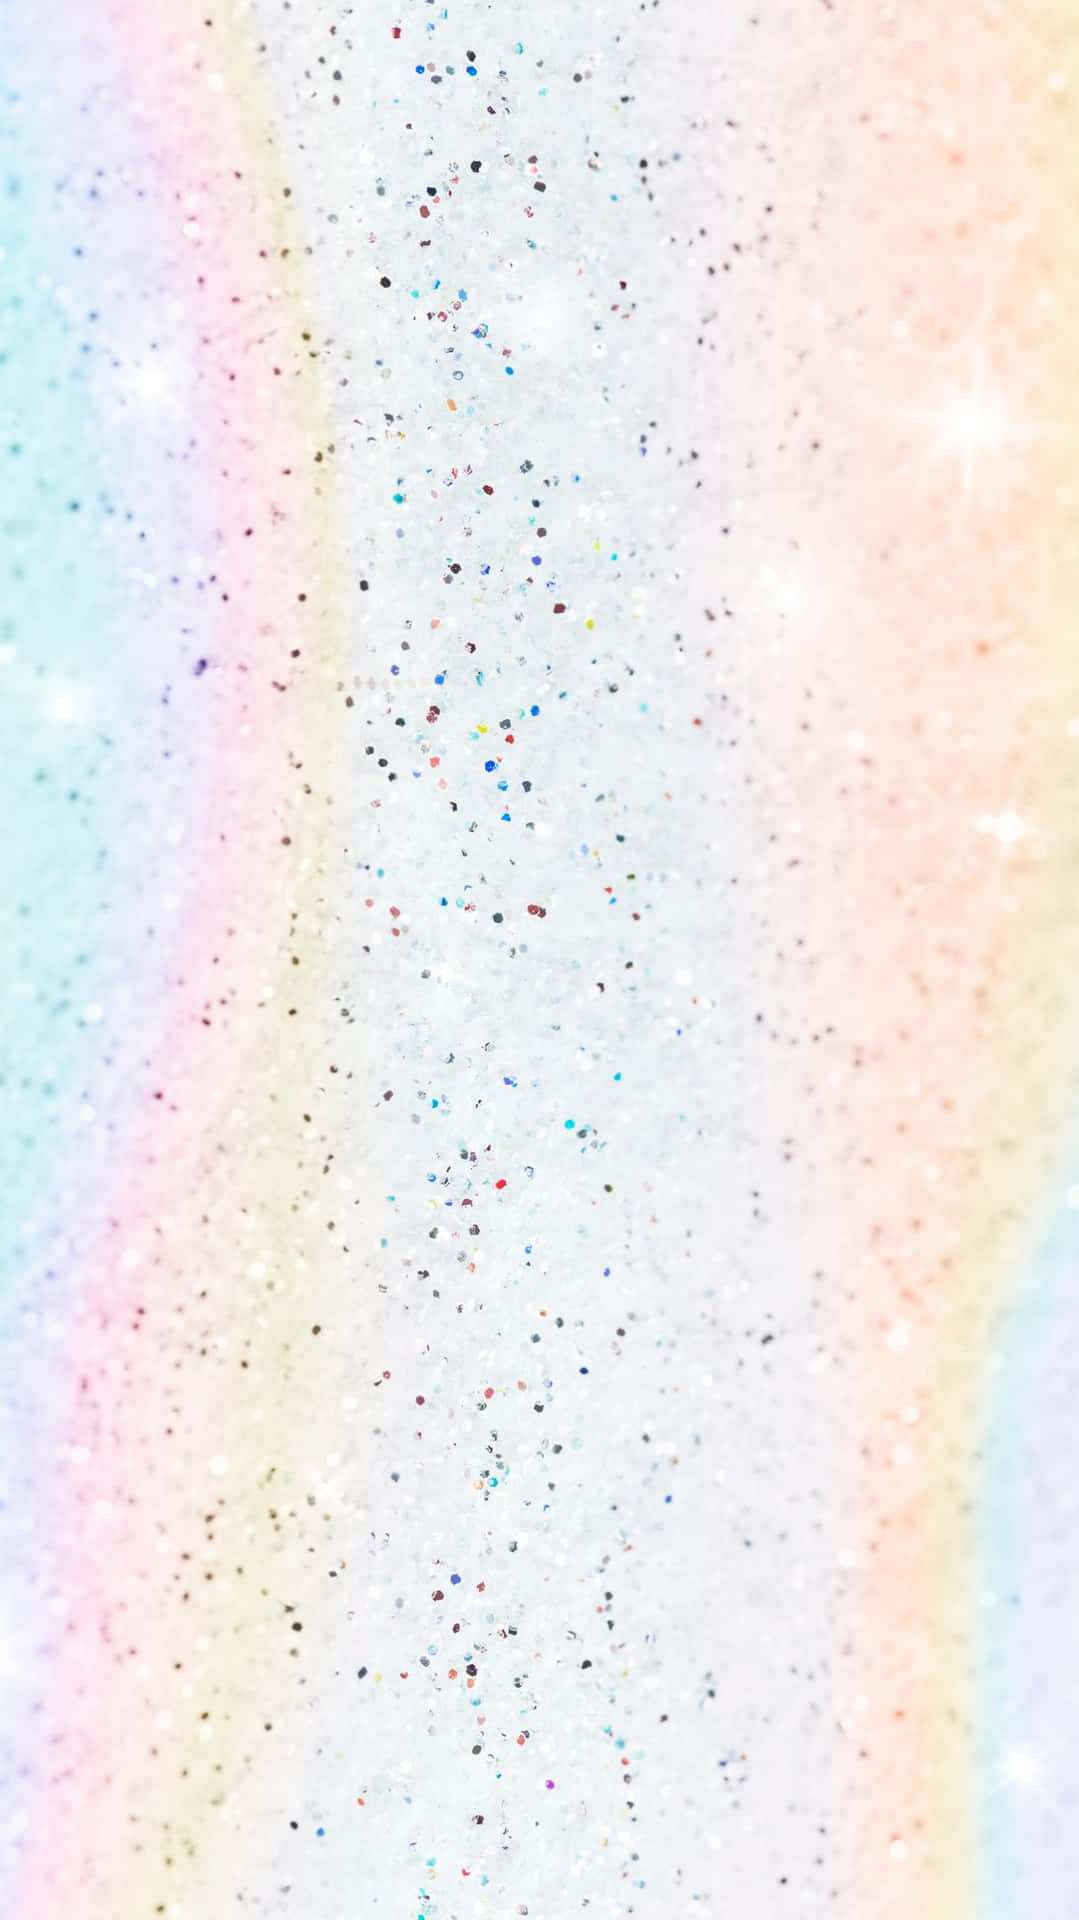 Brighten up your phone with a pastel rainbow! Wallpaper